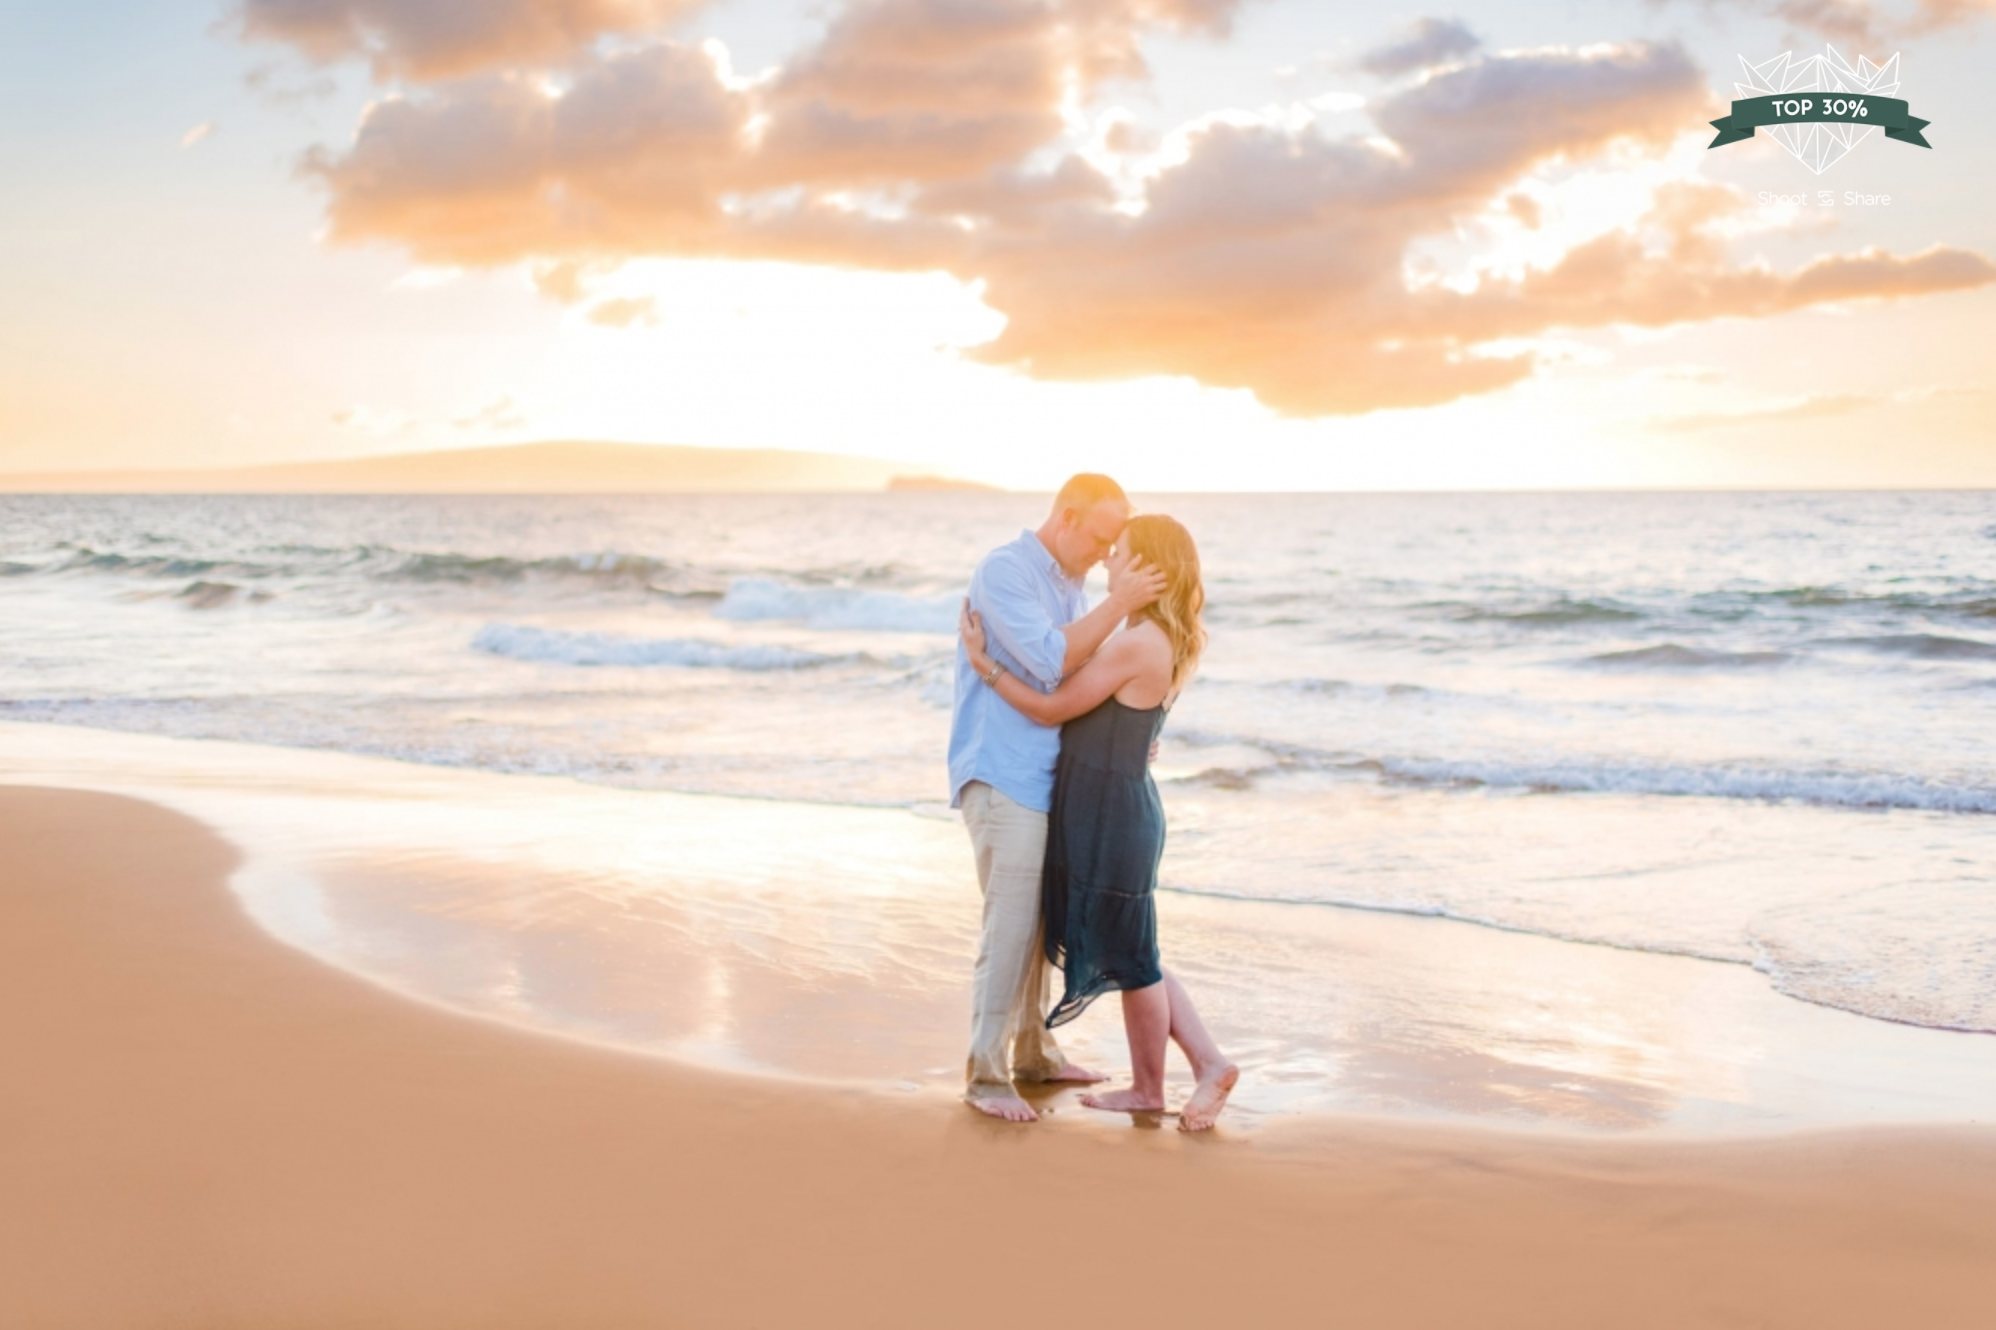 Shoot-Share-Contest-2018-Maui-Top-30-Engagement-Couples-Honeymoon-photographer.png